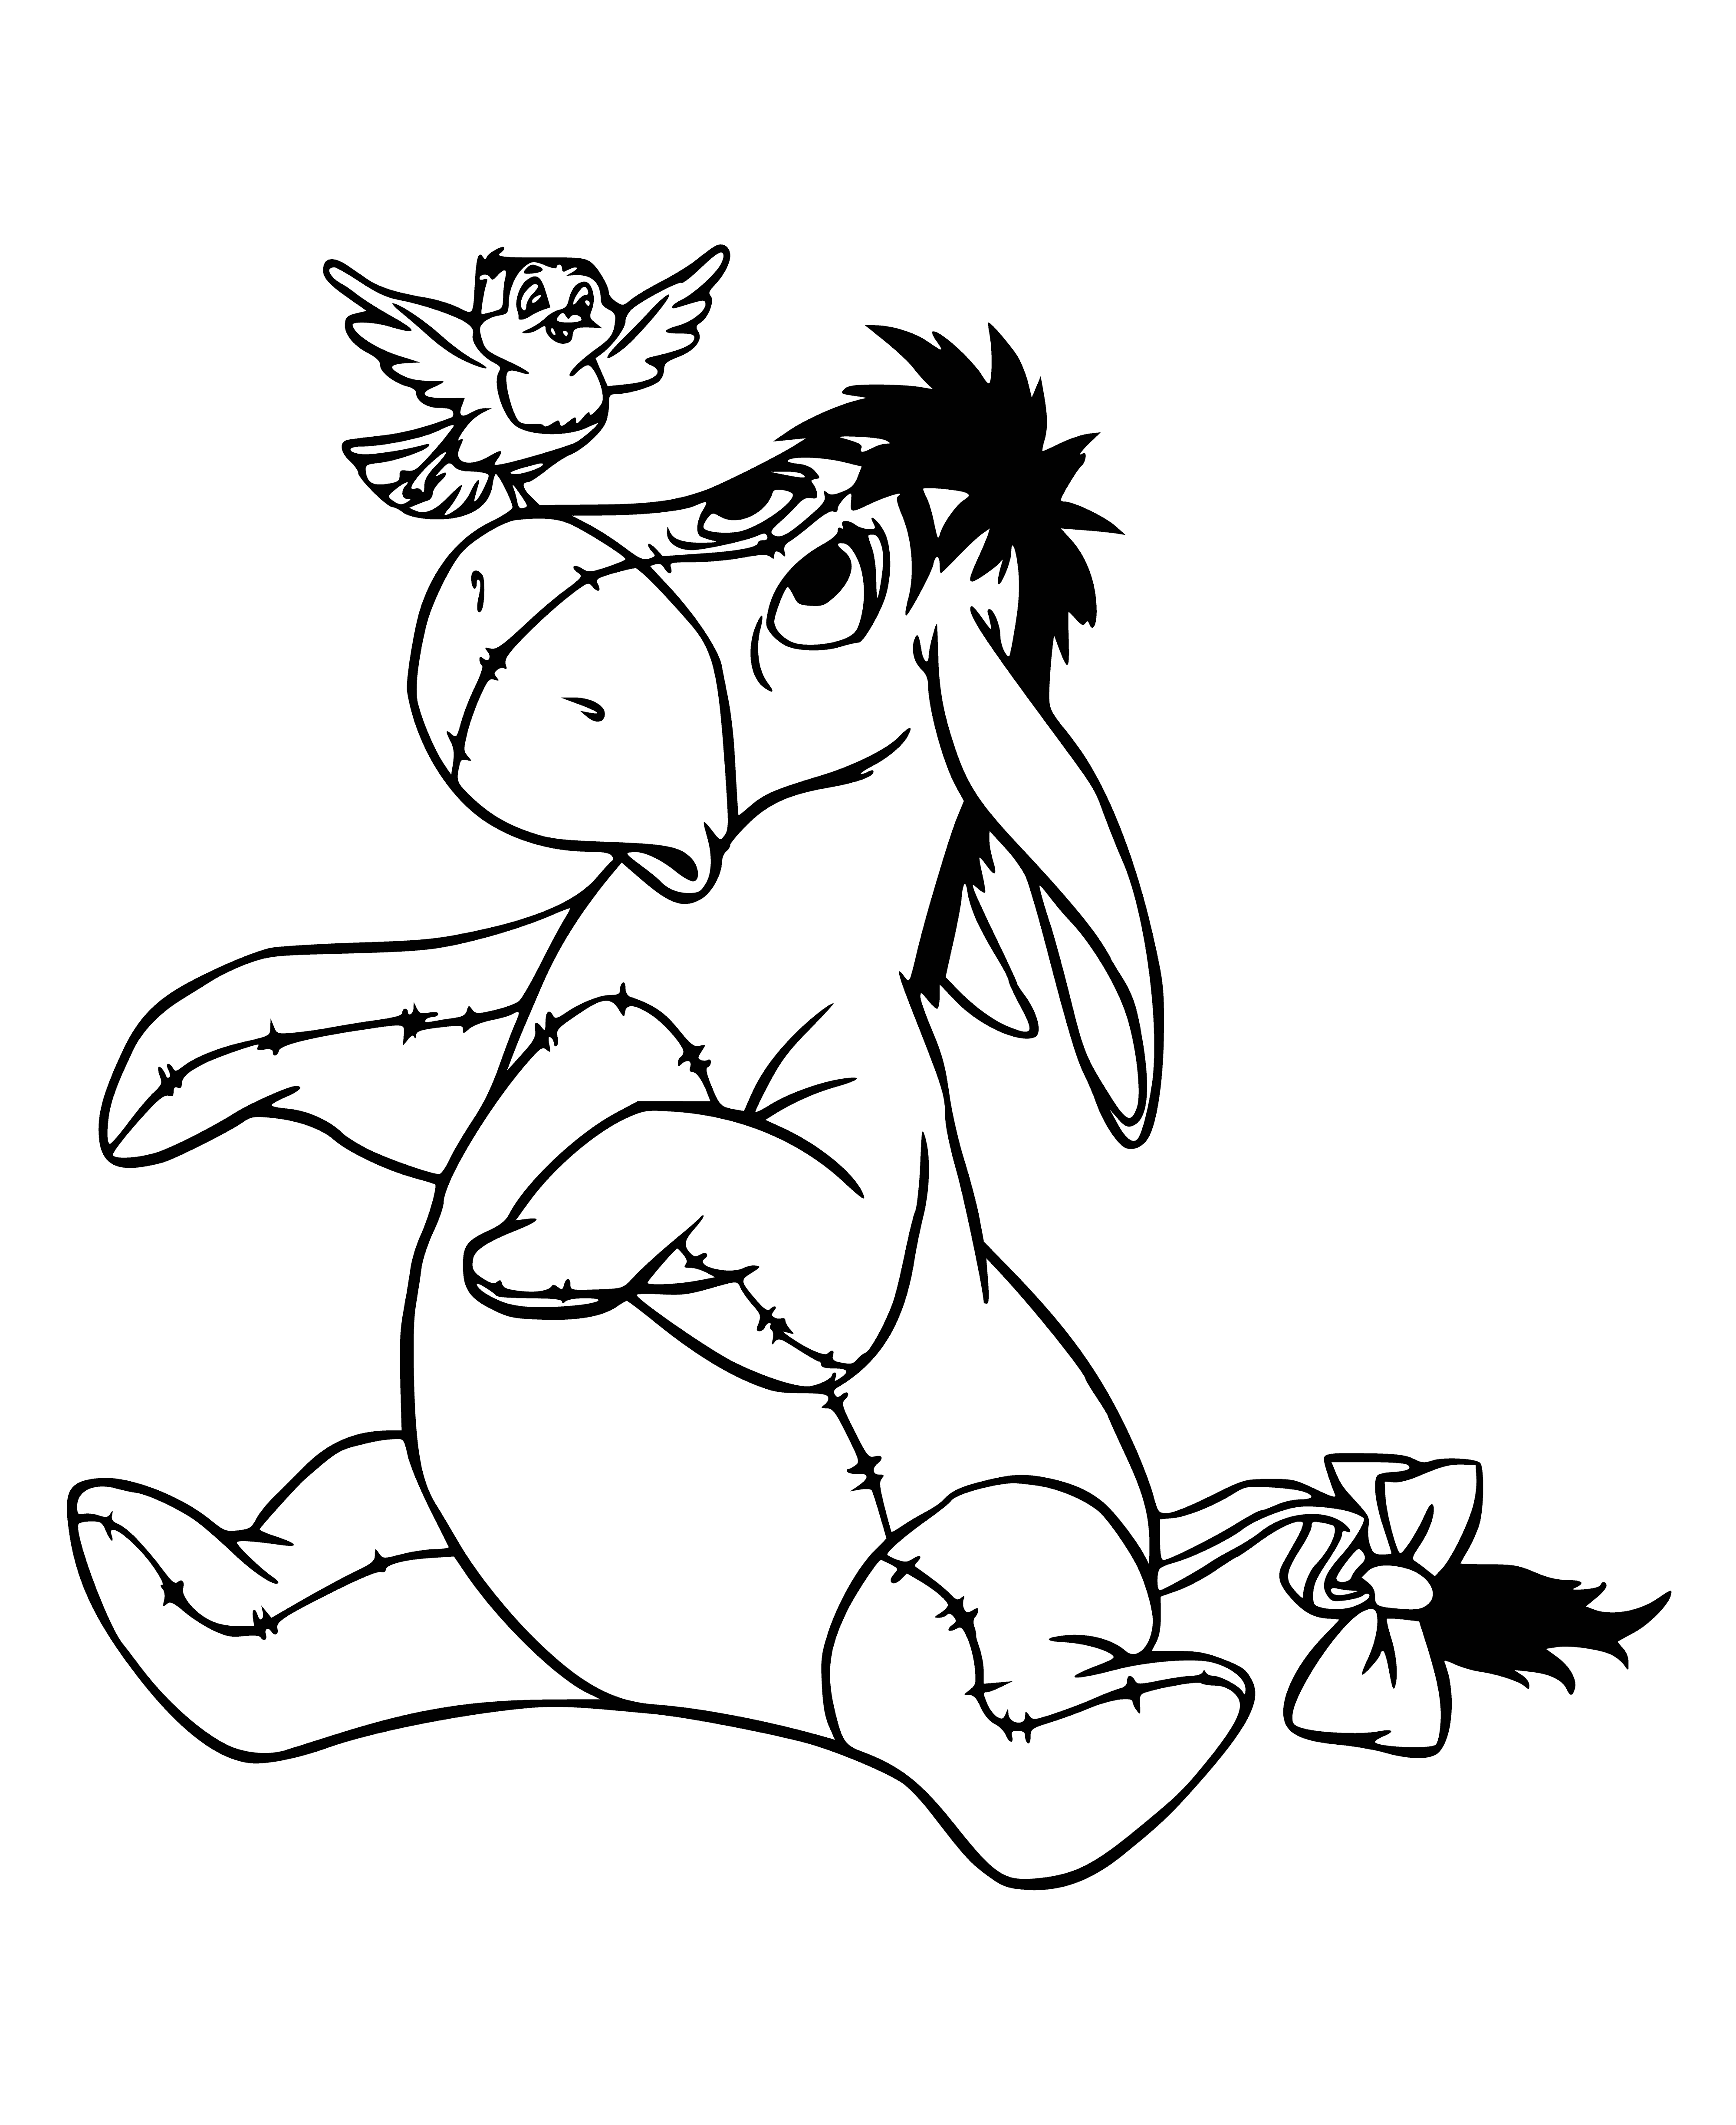 Eeyore and bird coloring page